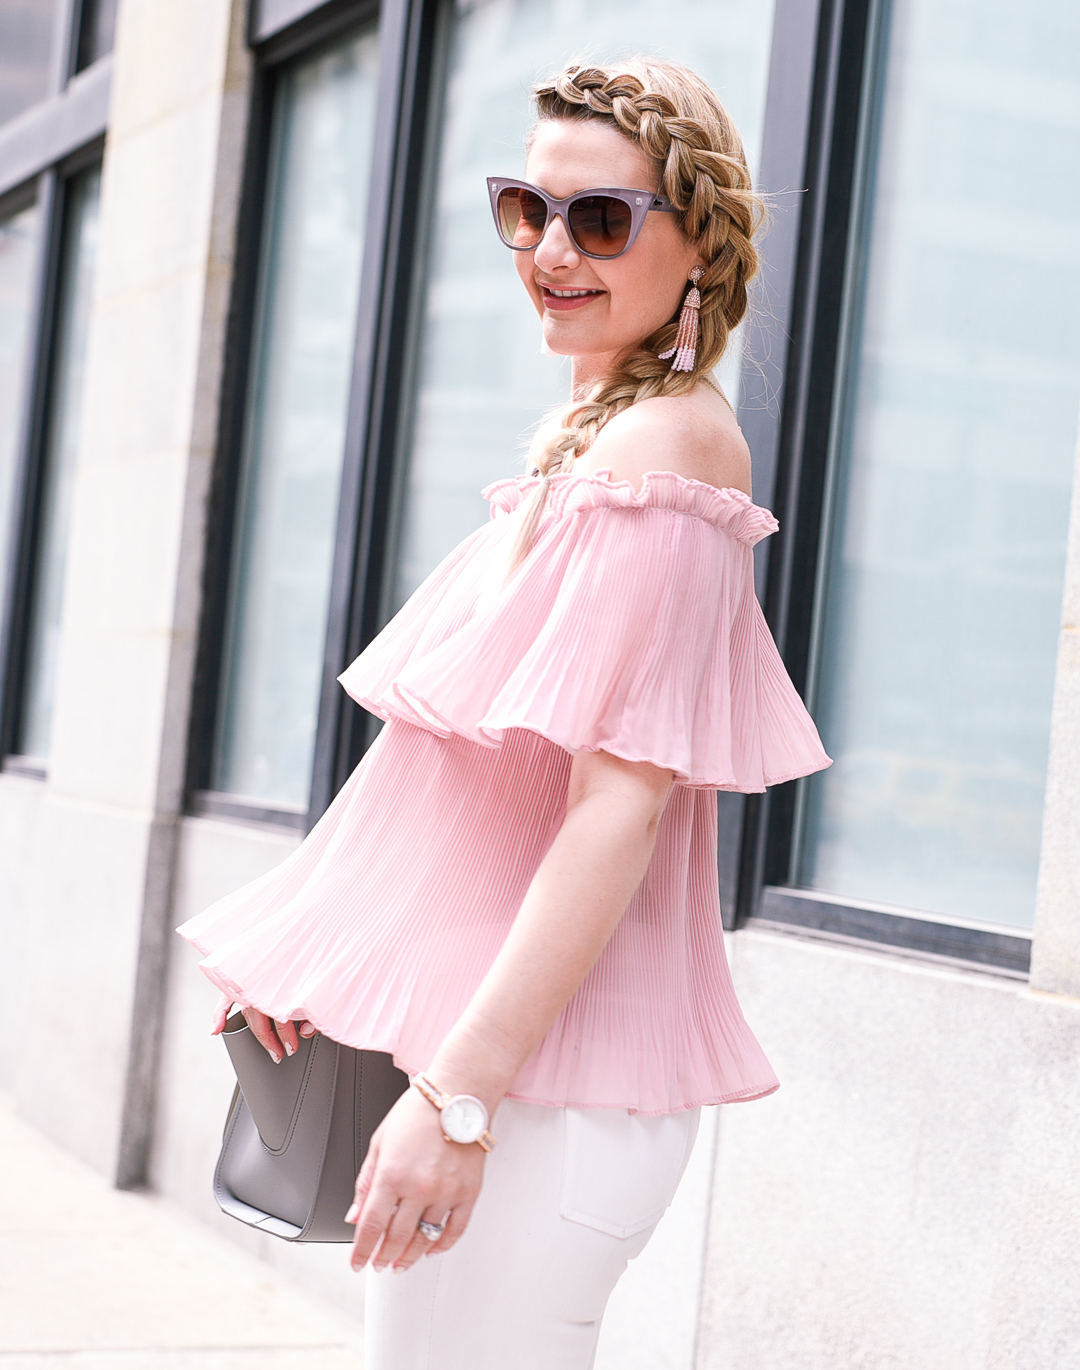 Pretty in a blush pink crinkled flutter top. 